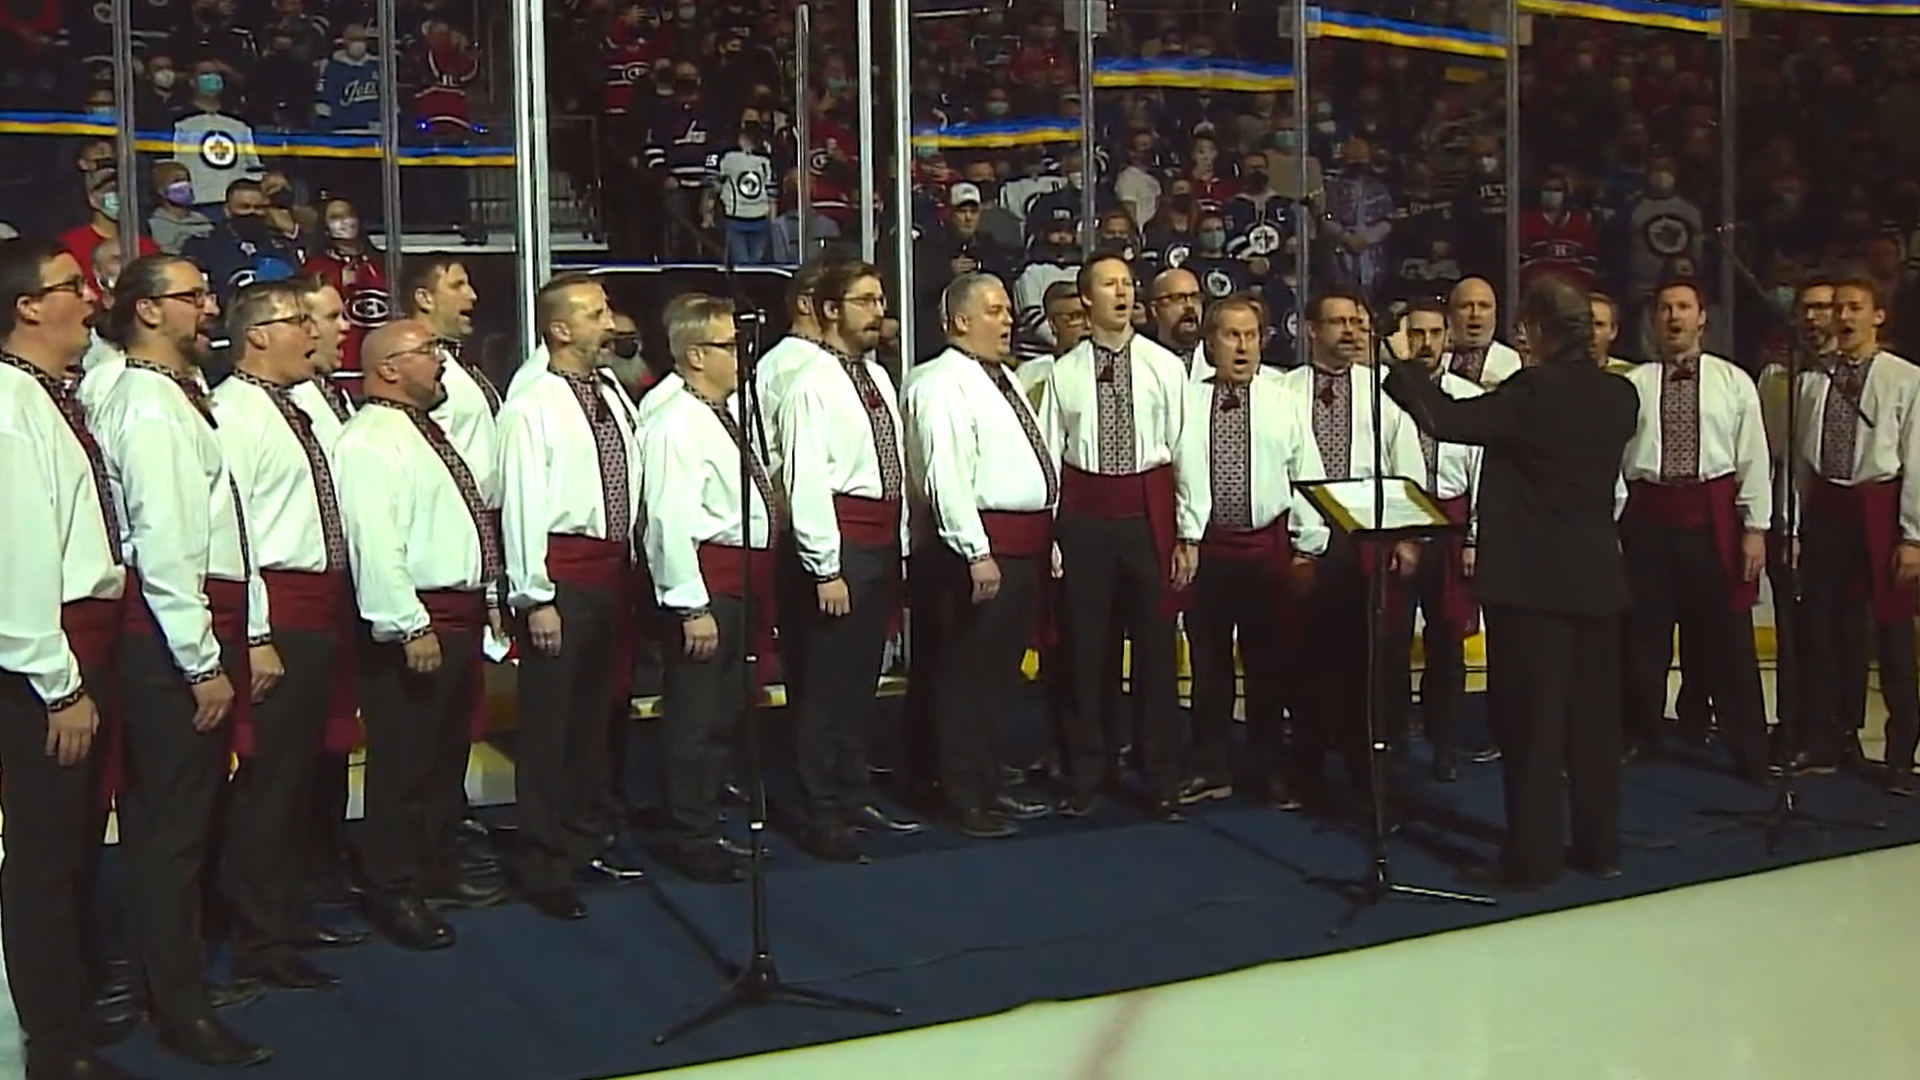 The Hoosli Male Ukrainian Chorus opened Tuesday night’s Winnipeg Jets game with a singing of the Ukrainian national anthem. The team said it was to express “heartfelt support for Ukraine and for more than 180,000 Ukrainian-Canadians living in Manitoba.”